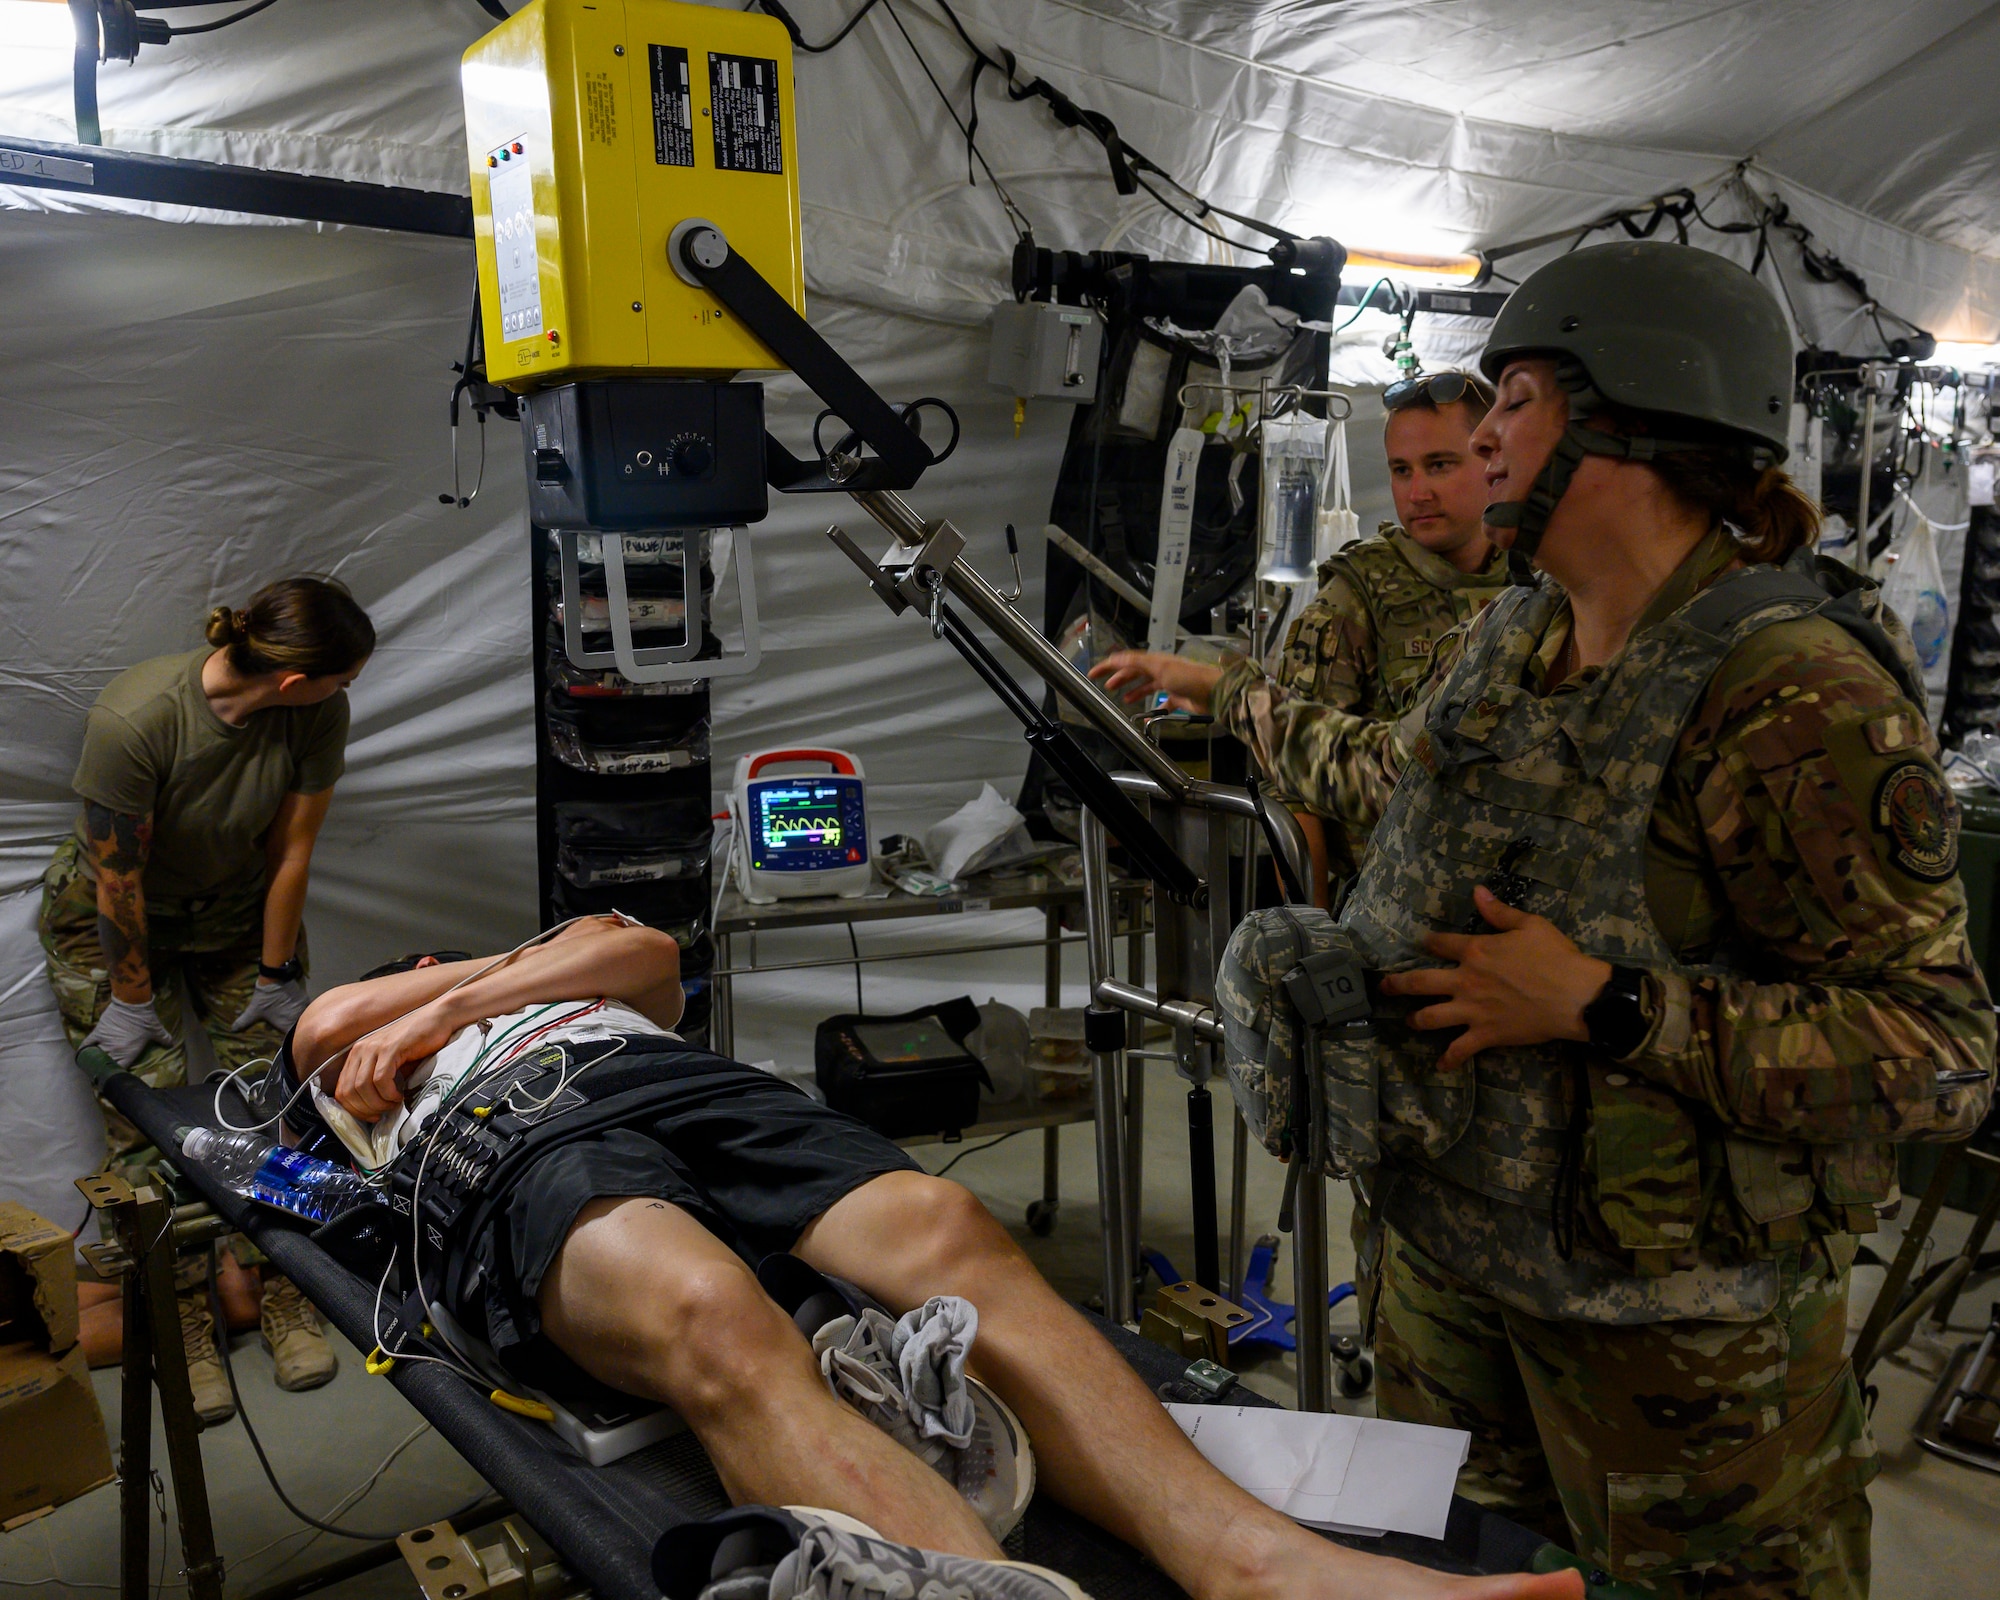 378th Expeditionary Medical Group personnel administer treatment to a simulated victim during a mass casualty and missile defense exercise at Prince Sultan Air Base, Kingdom of Saudi Arabia, Oct. 28 2021.